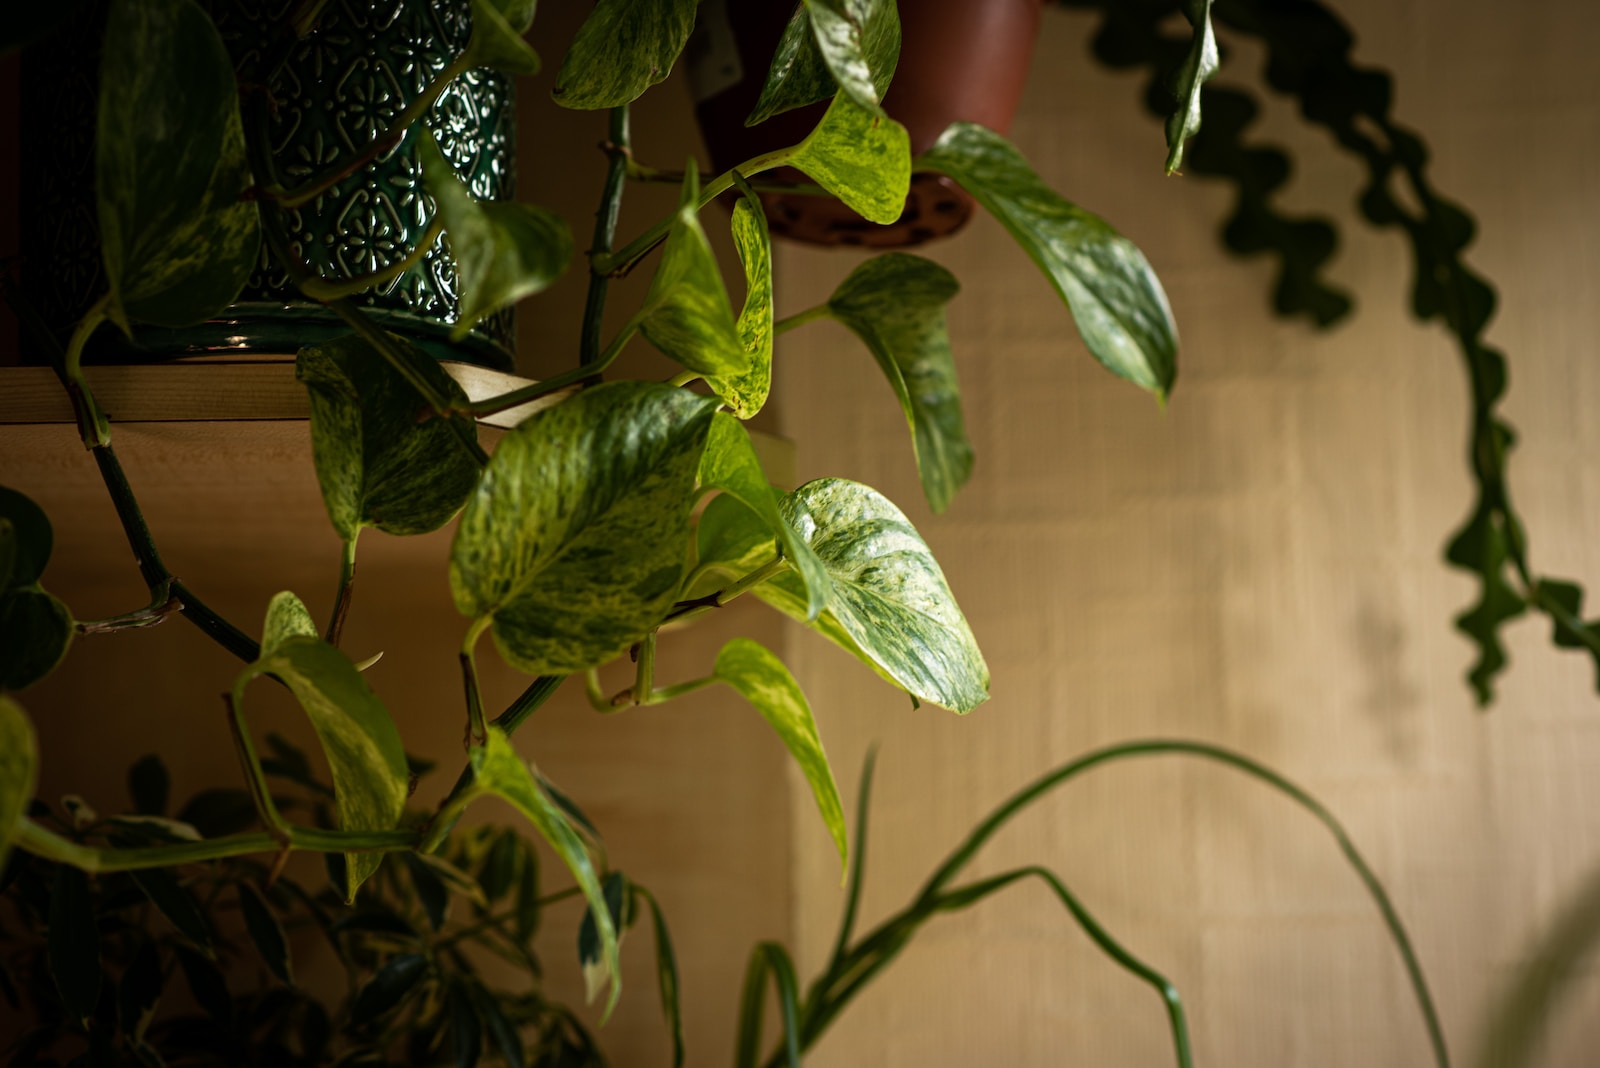 Transform Your Home with These 5 Indoor Vining Plants